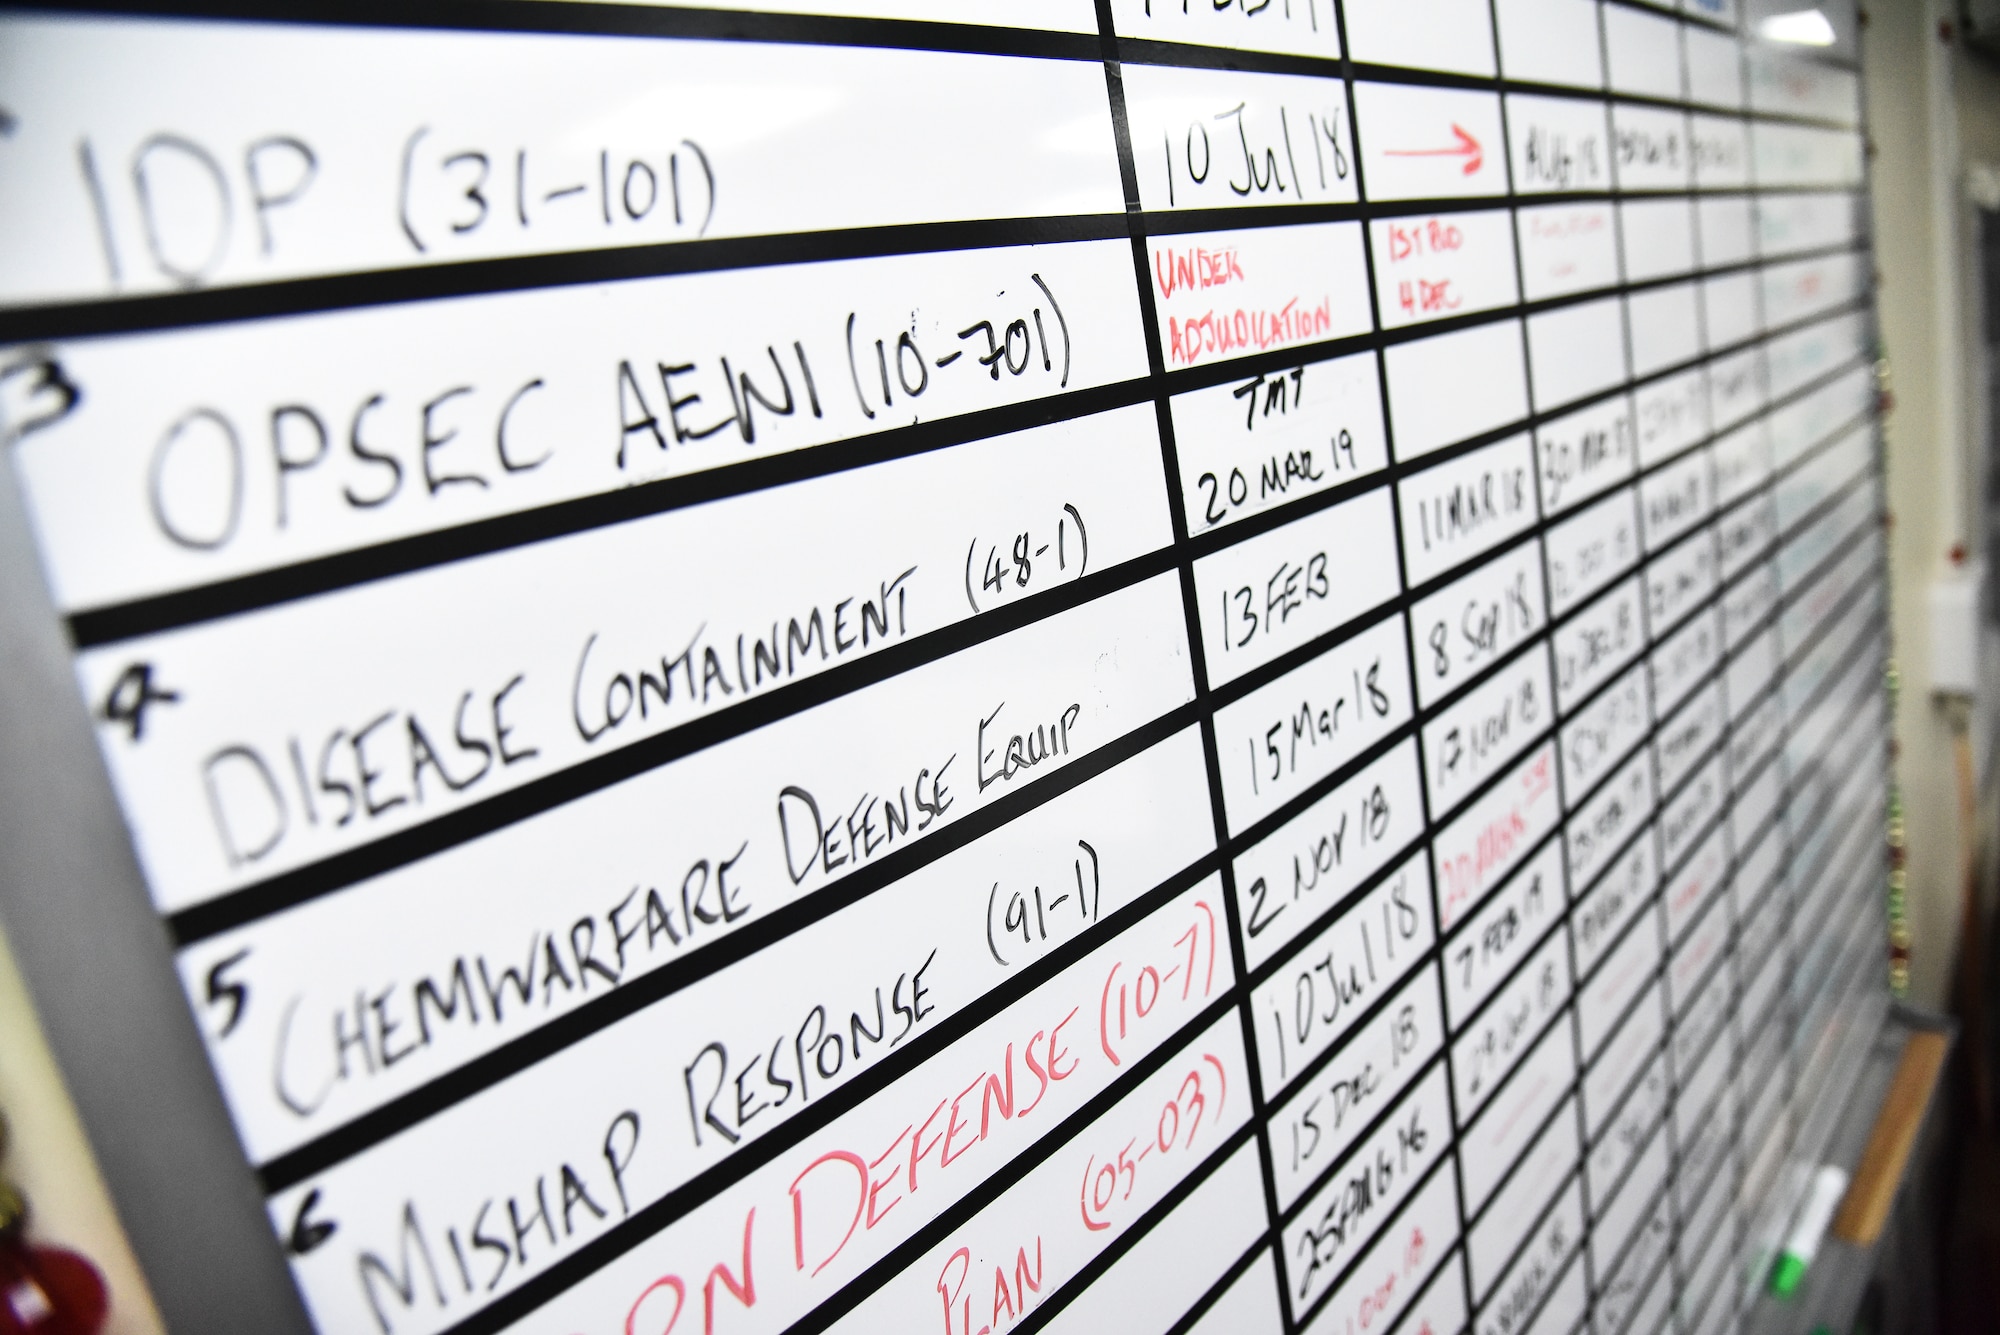 The 380th Air Expeditionary Wing Plans and Programs shop displays a list of base plans at Al Dhafra Air Base, United Arab Emirates, Mar. 21, 2019. The 380th AEW plans and programs shop, also known as XP, manages 18 base plans that the wing maintains for various contingencies (Chemical, Biological, Radiological, Nuclear, and Explosive; mishap response; disease containment; etc.) and runs the Operations Security, Mission Assurance and Signature Management programs. (U.S. Air Force photo by Senior Airman Mya M. Crosby)